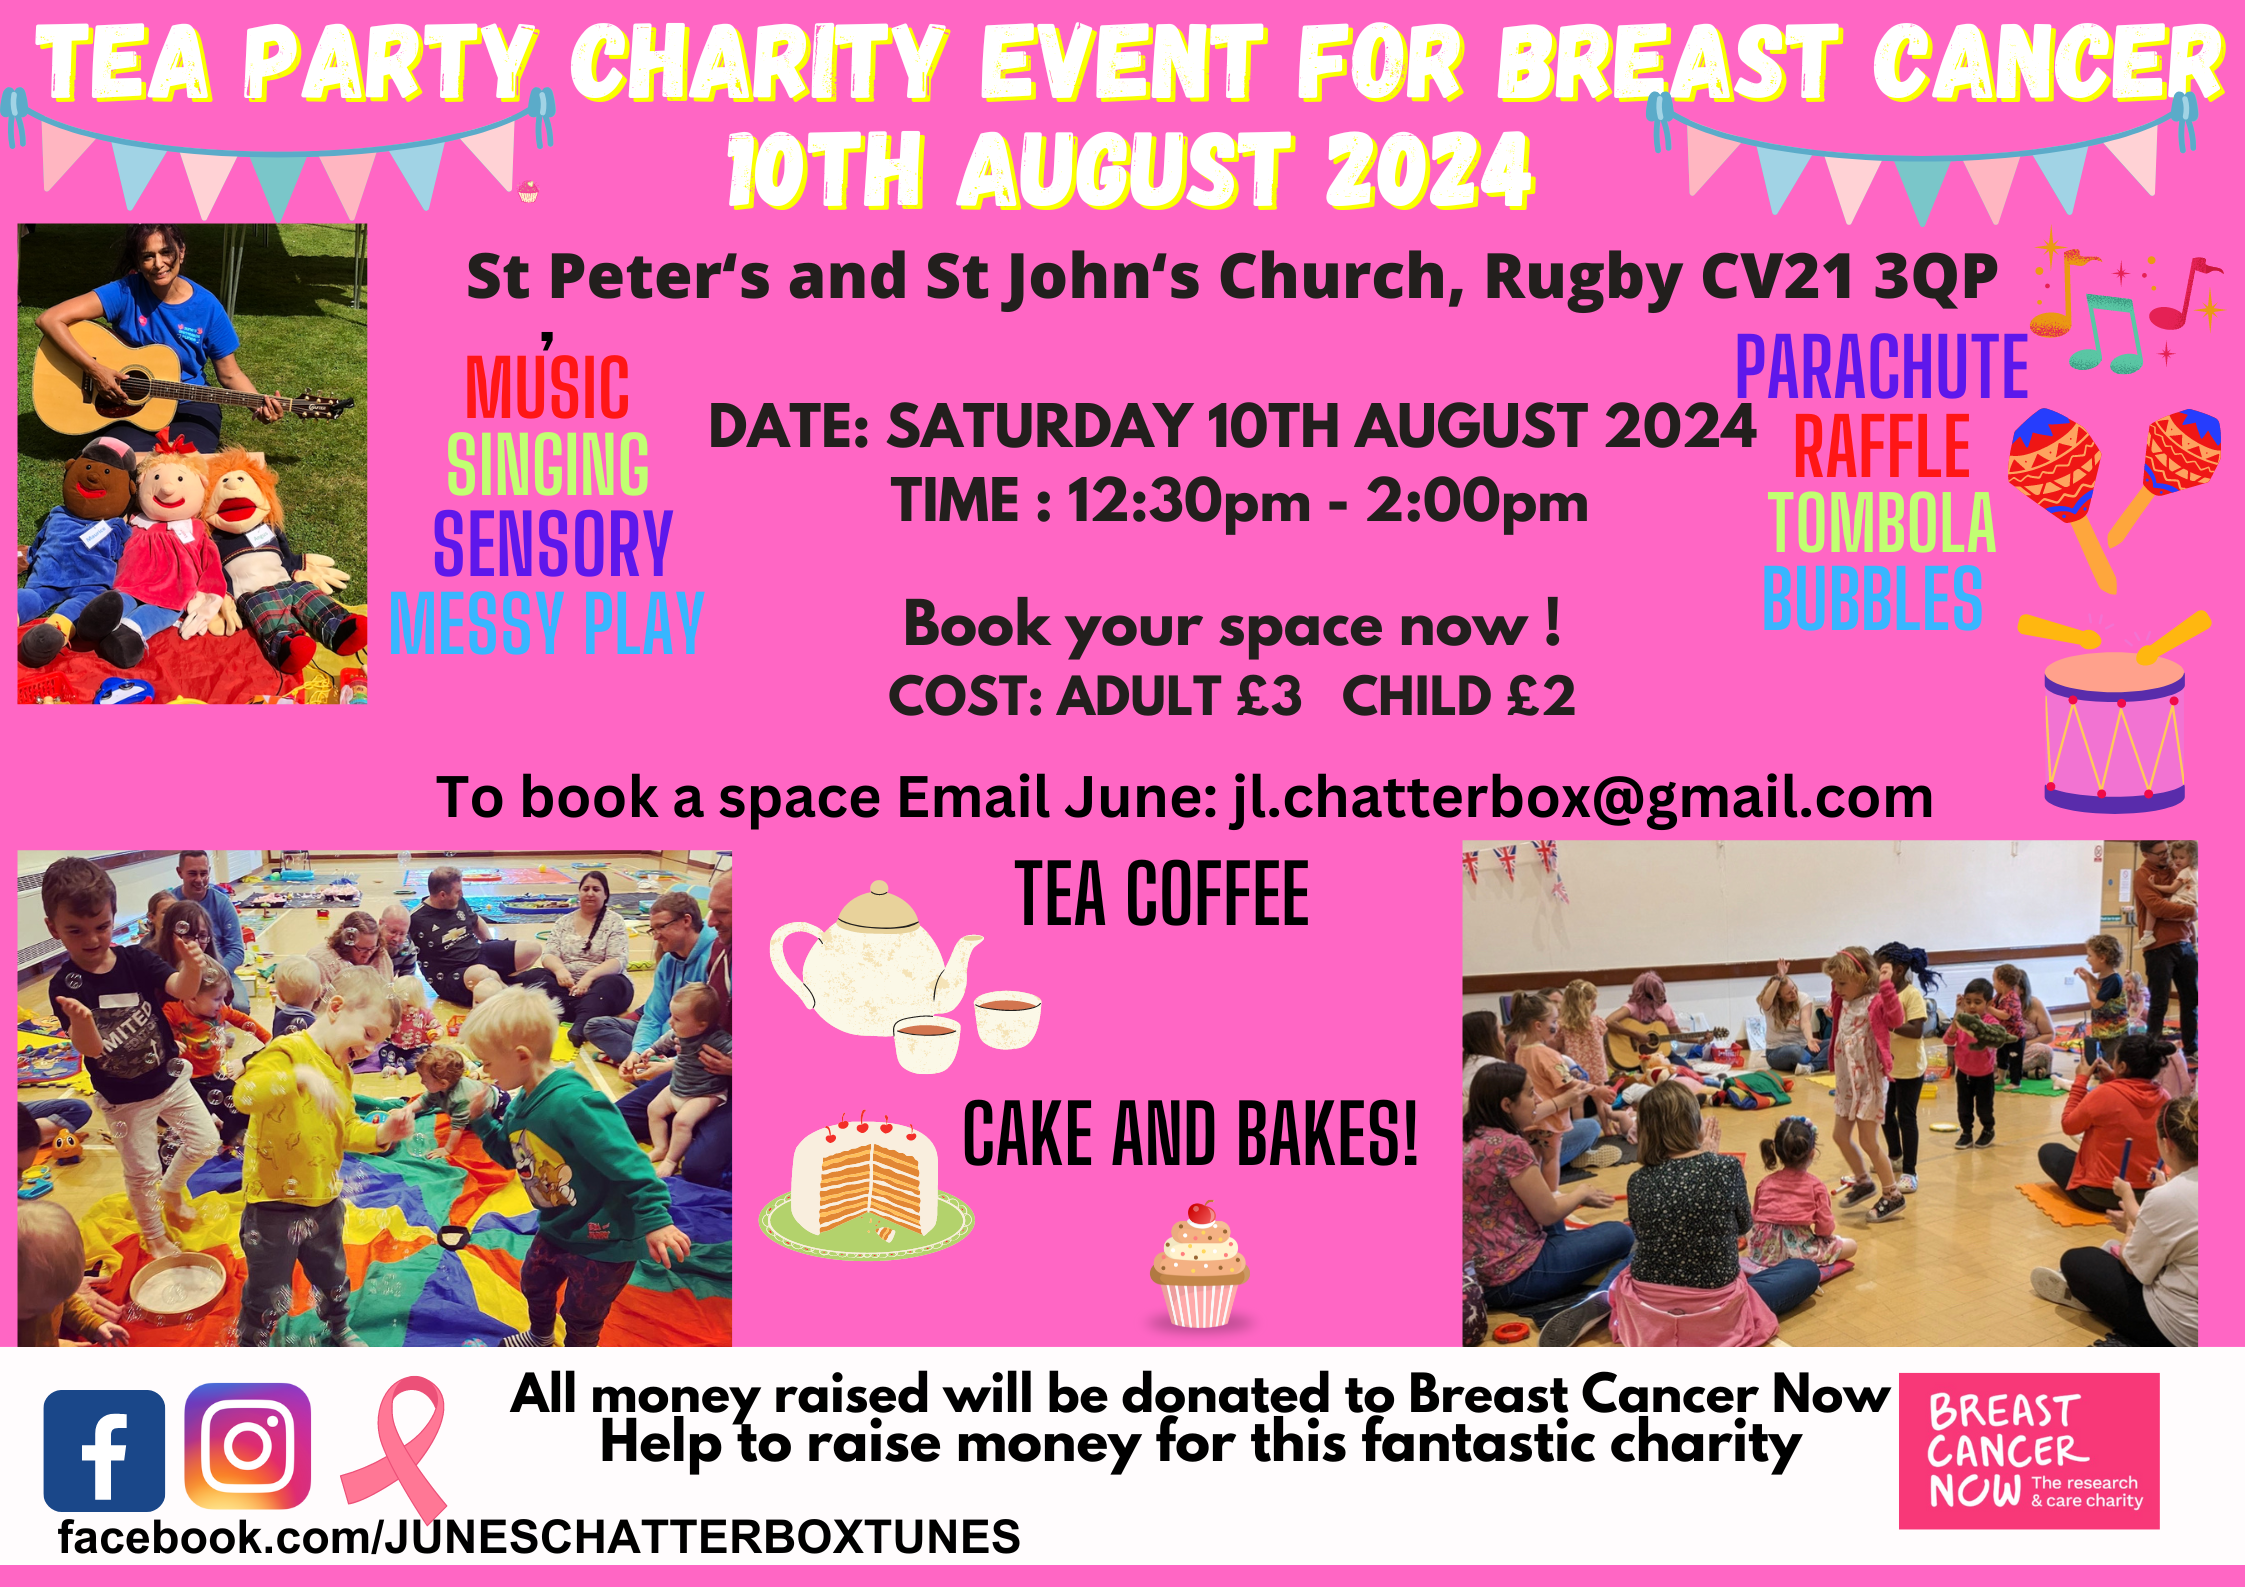 Photo of Charity Tea Party for Breast Cancer Saturday 10th August 2024 in Rugby